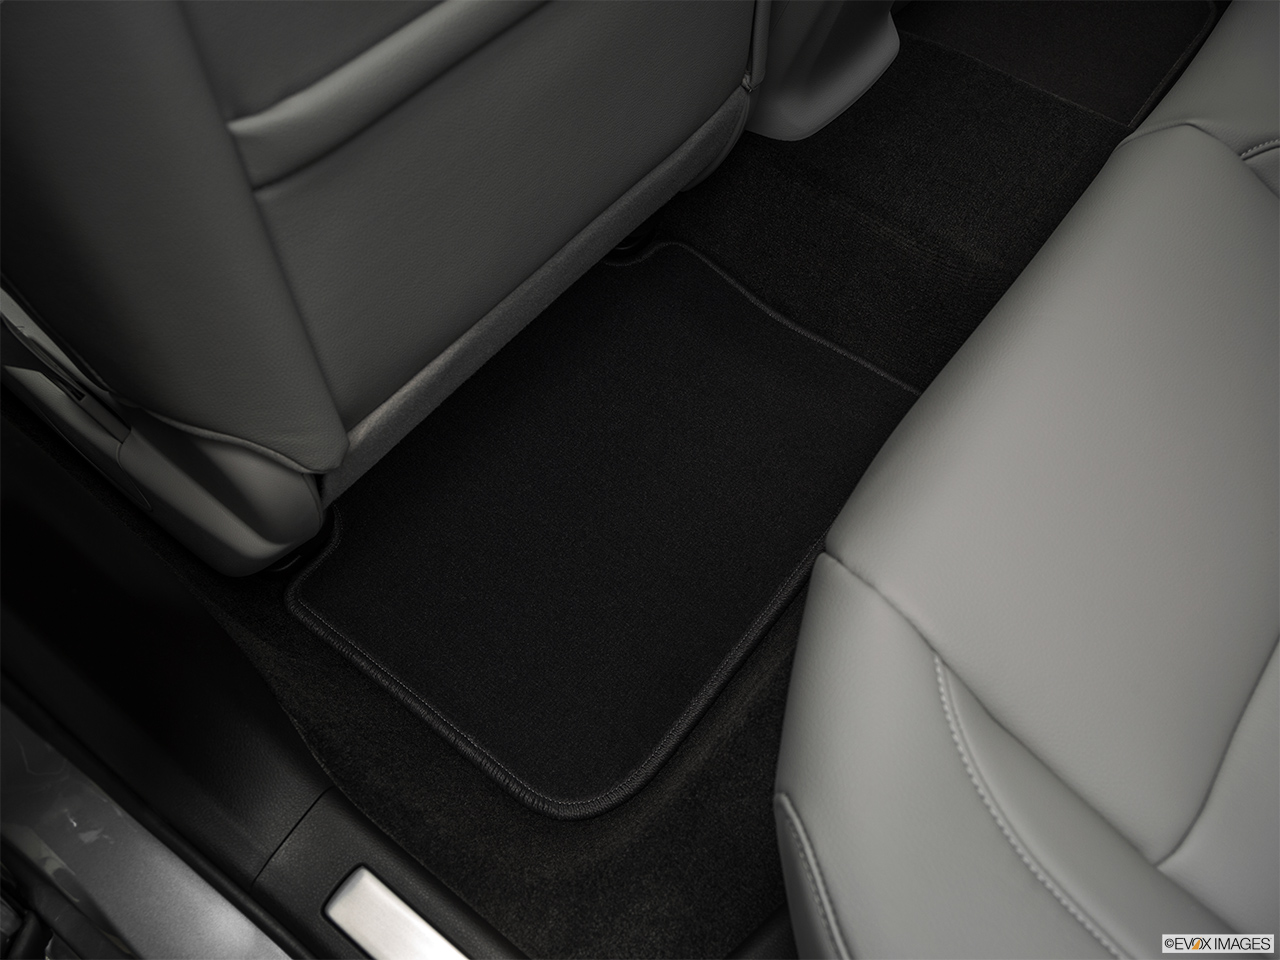 2020 Acura TLX 2.4 8-DCT P-AWS Rear driver's side floor mat. Mid-seat level from outside looking in. 